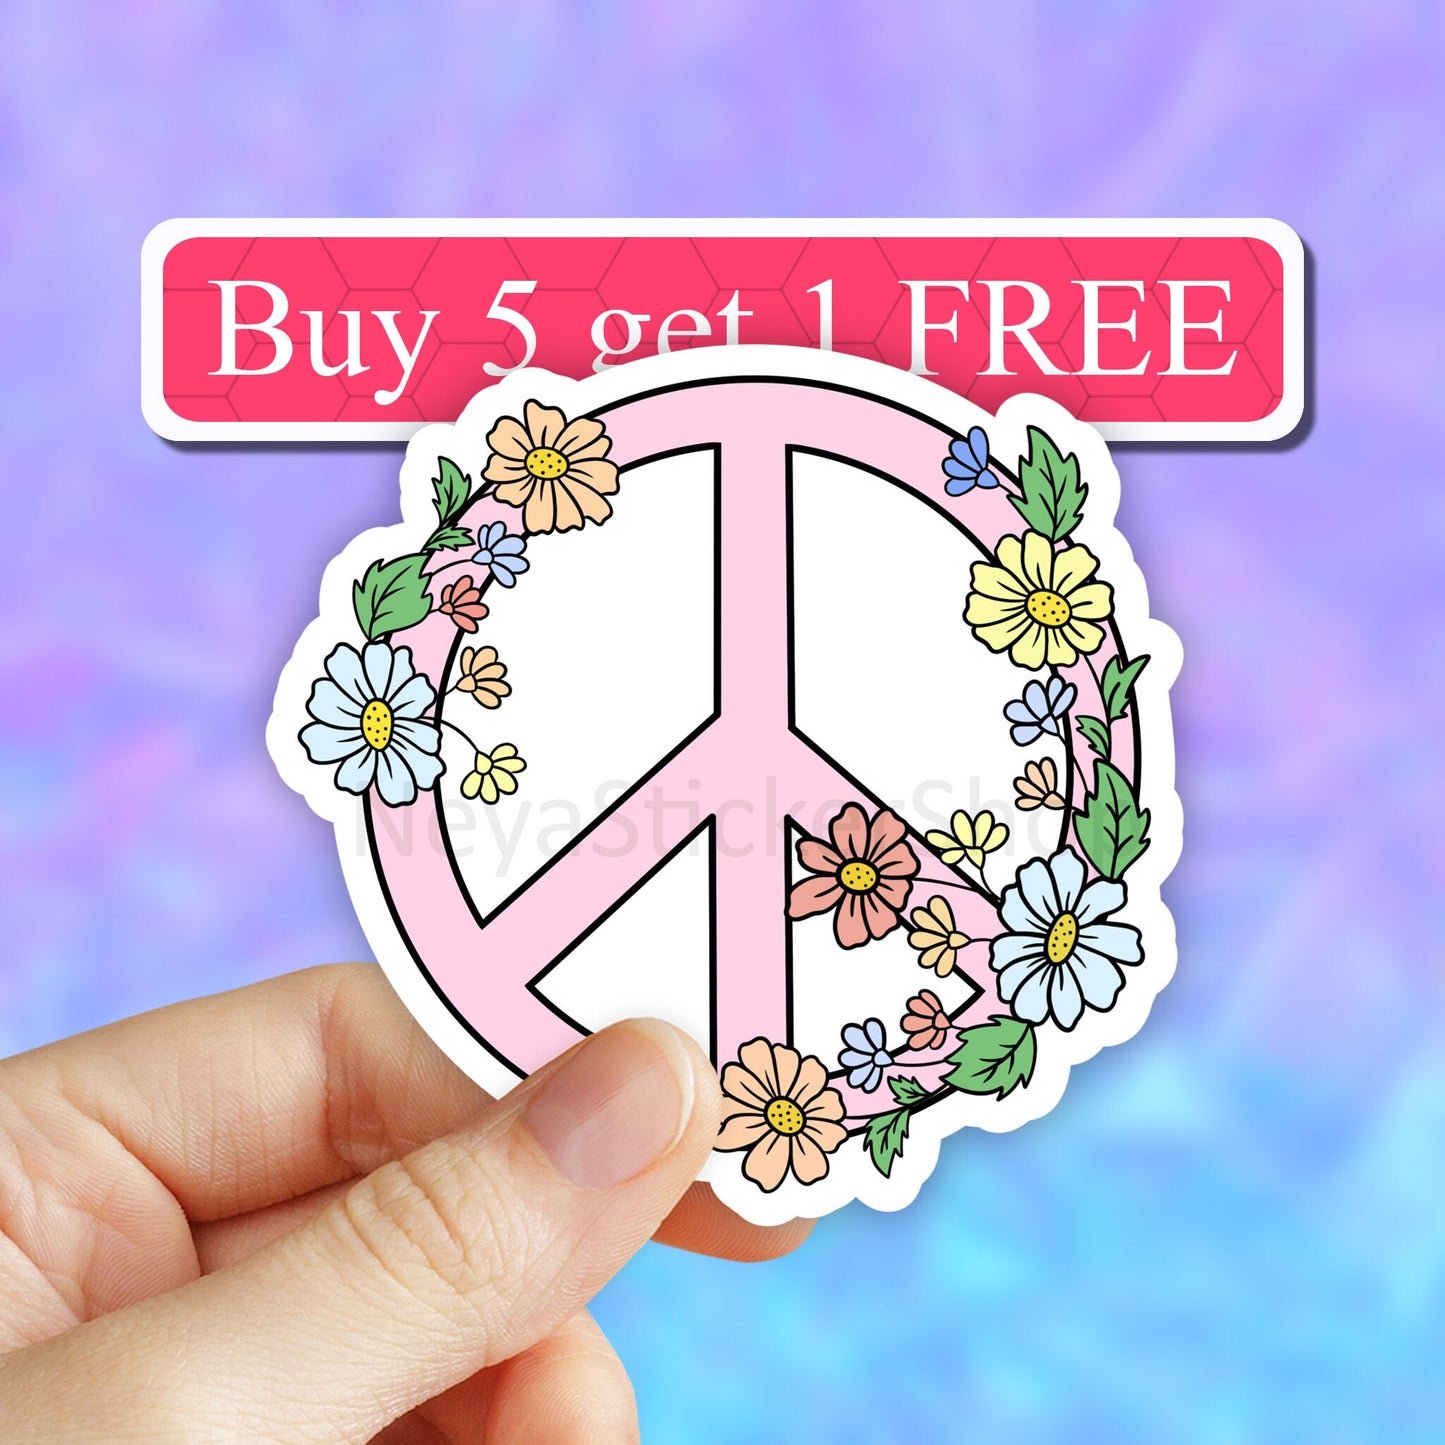 Floral Peace sign Sticker, peace sign sticker,  Inspirational stickers, Water bottle sticker, Laptop Stickers, Laptop decal, Vinyl stickers